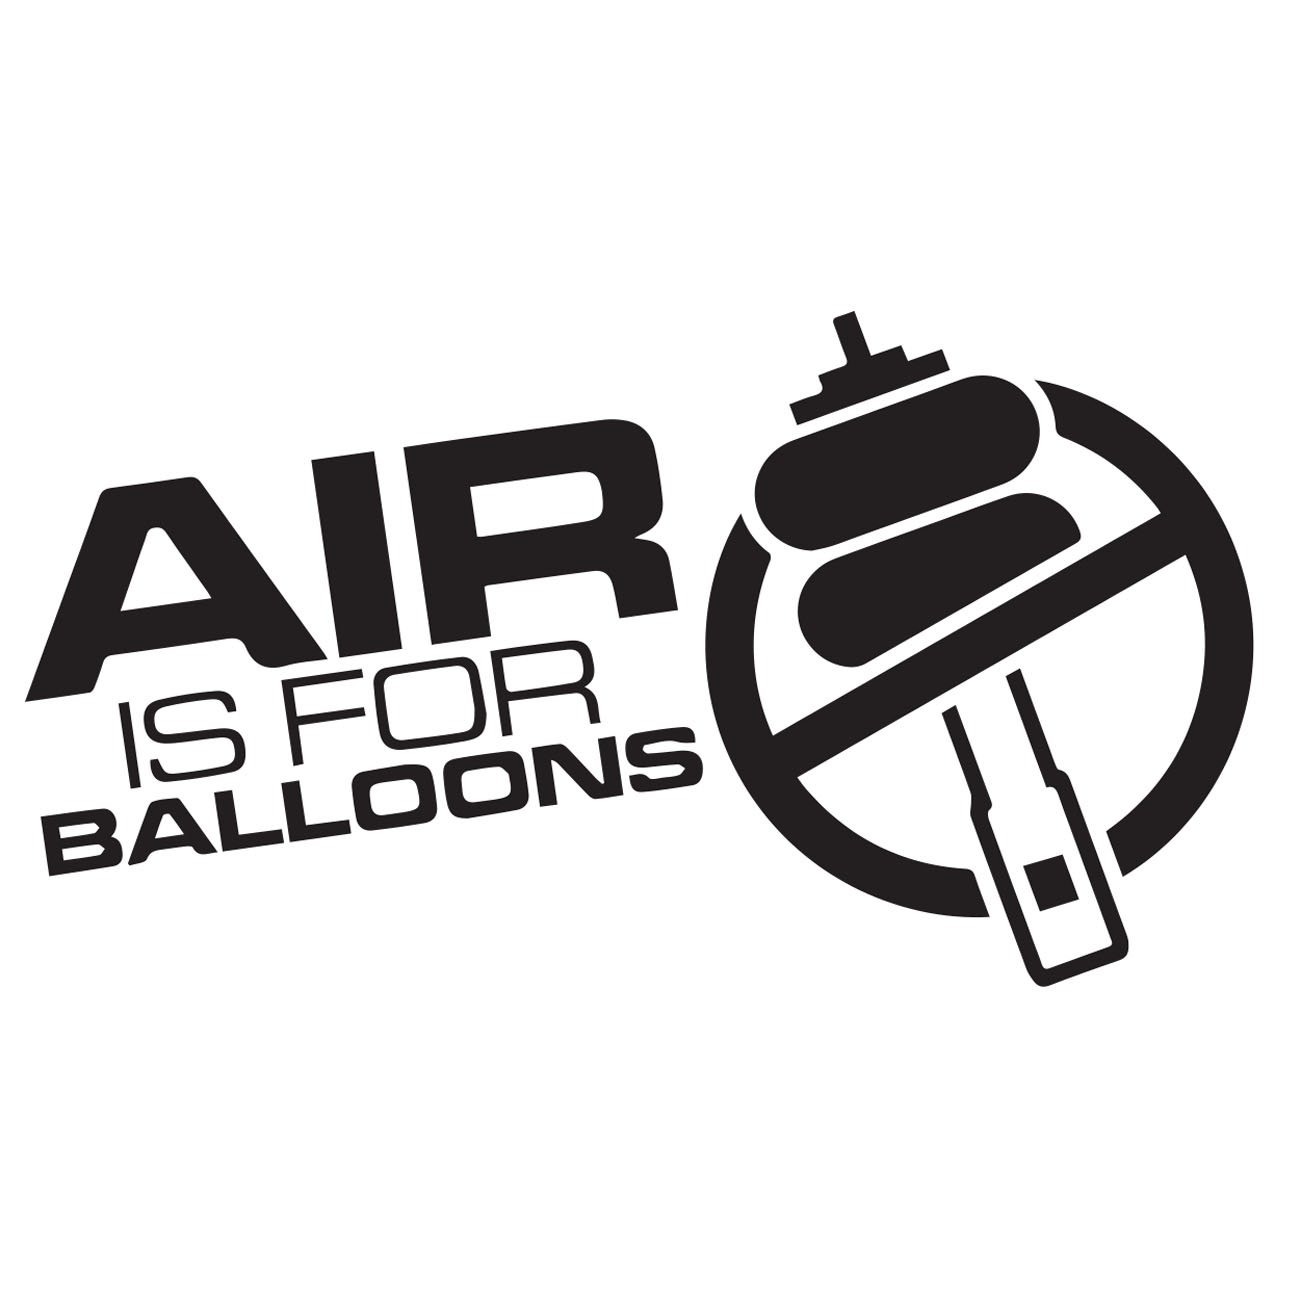 Air is for balloons 1